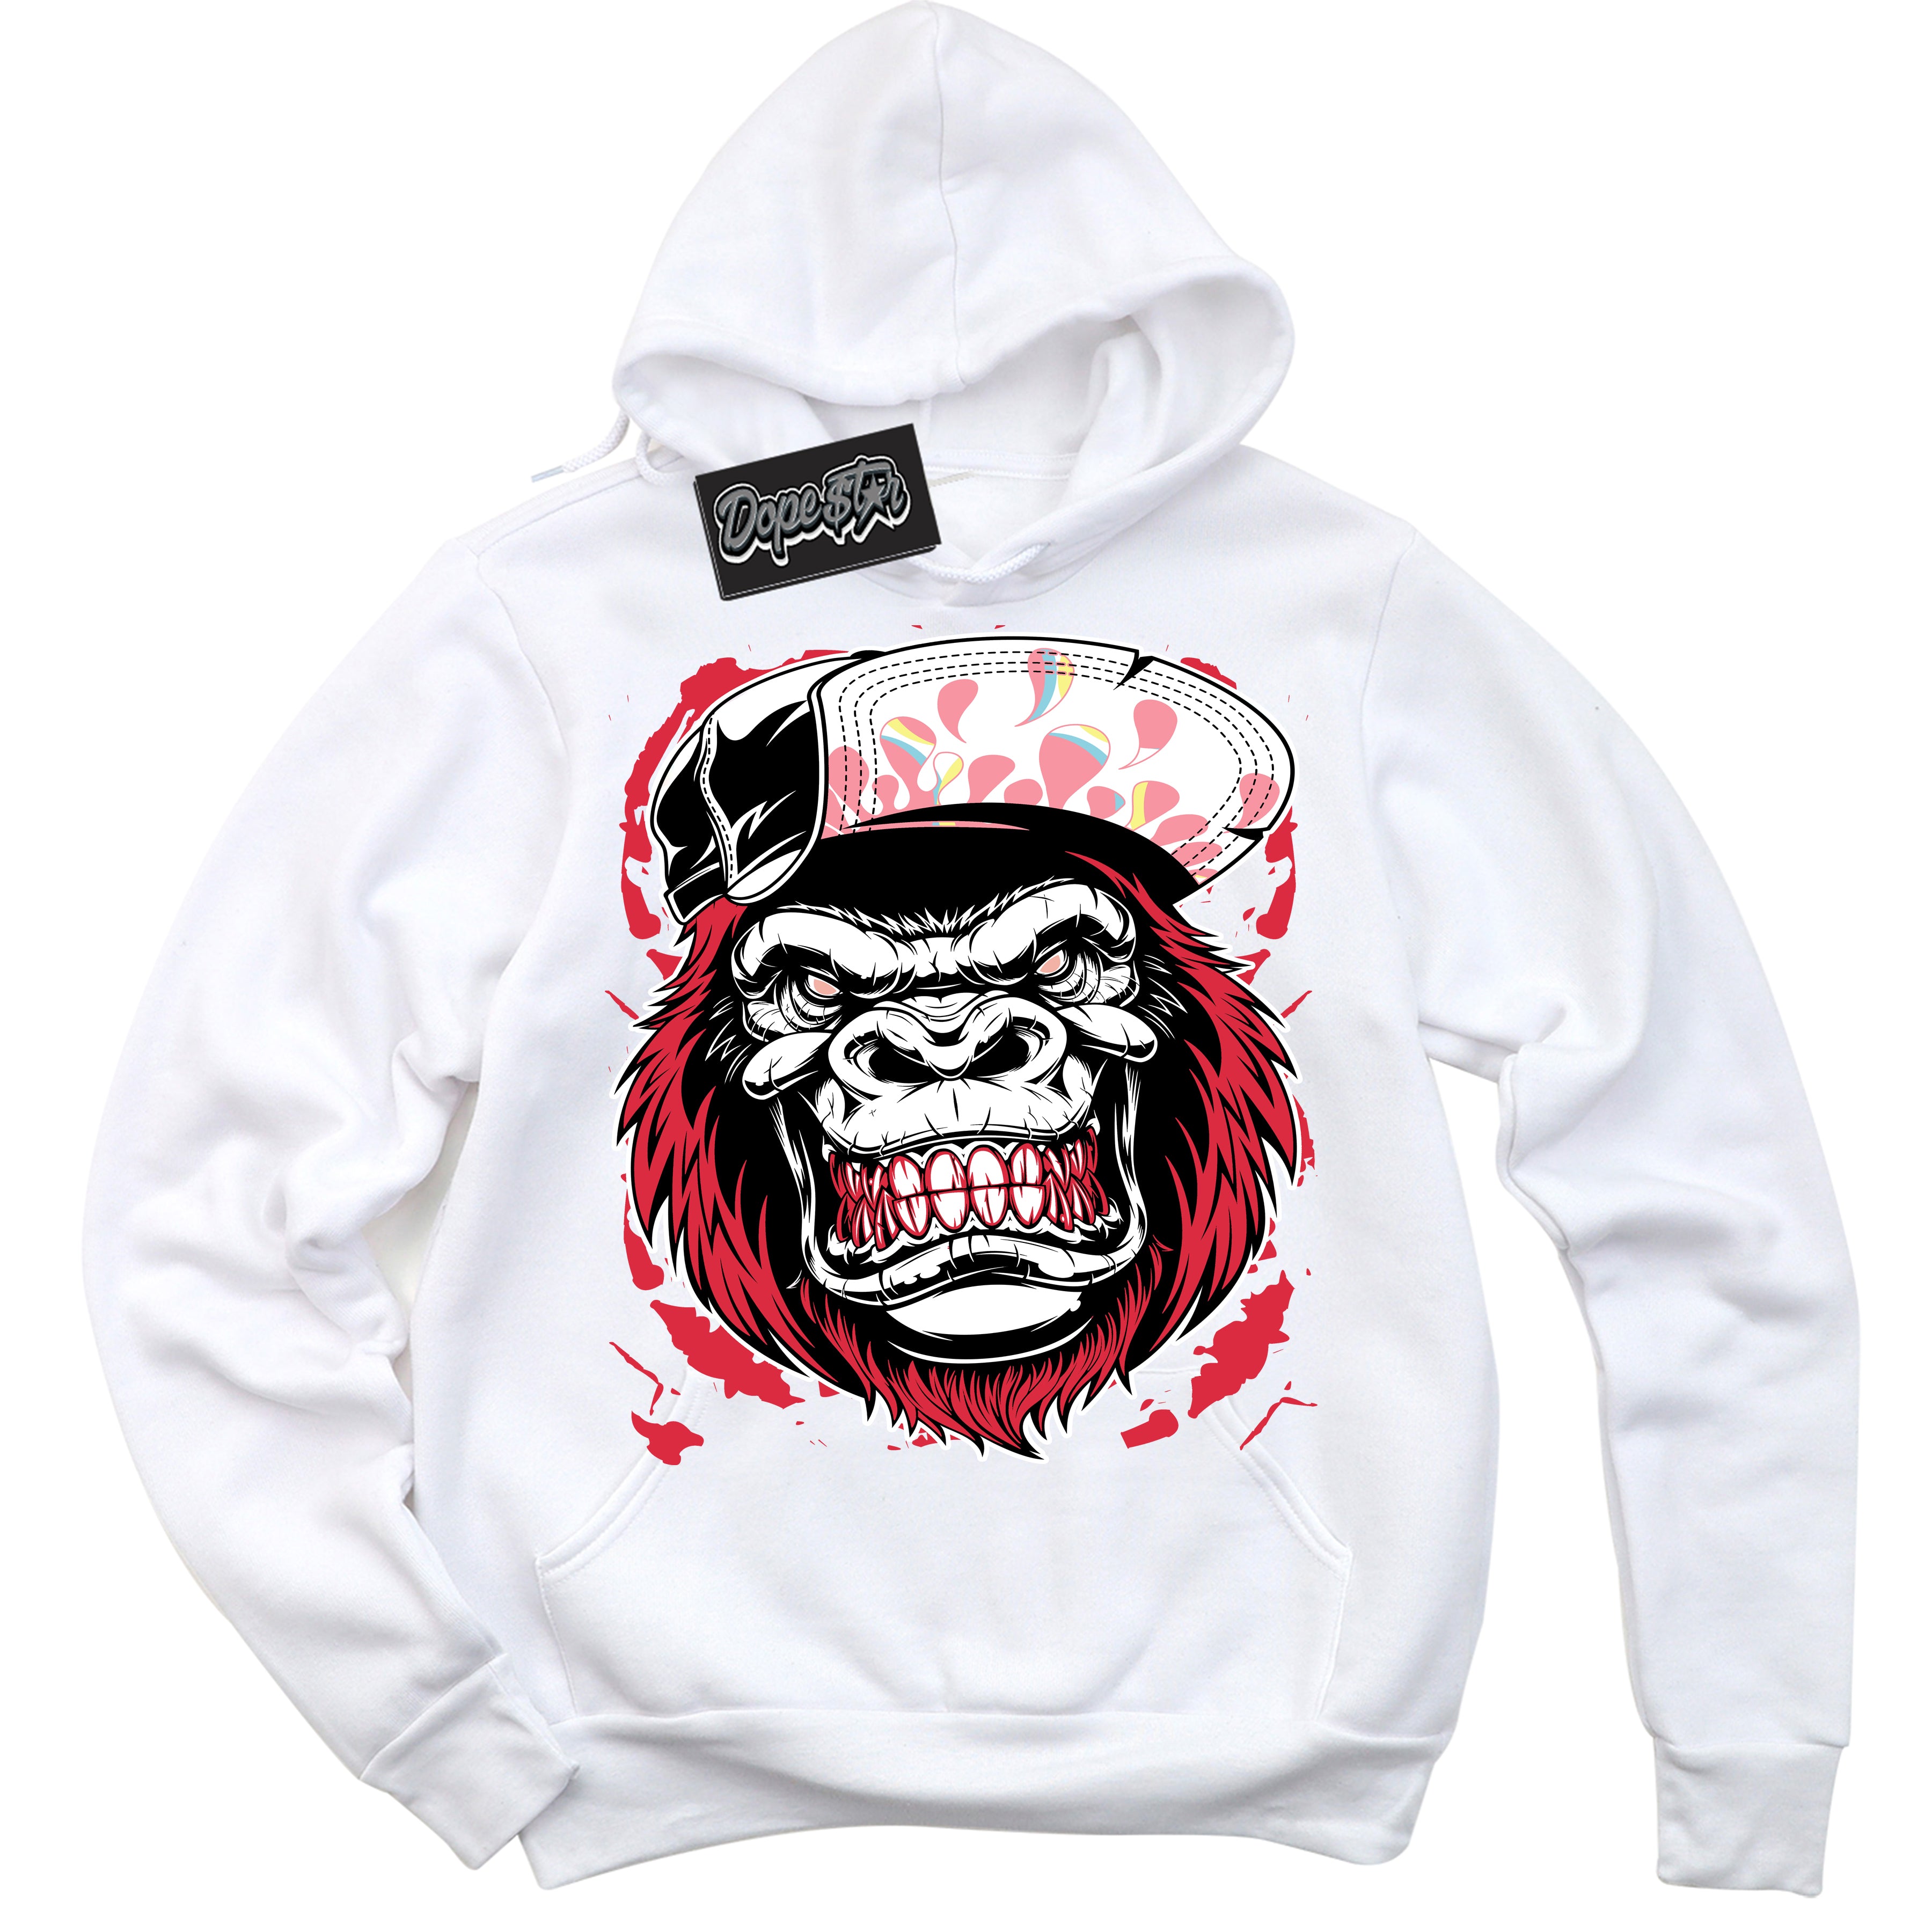 Cool White Graphic DopeStar Hoodie with “ Gorilla Beast “ print, that perfectly matches Spider-Verse 1s sneakers